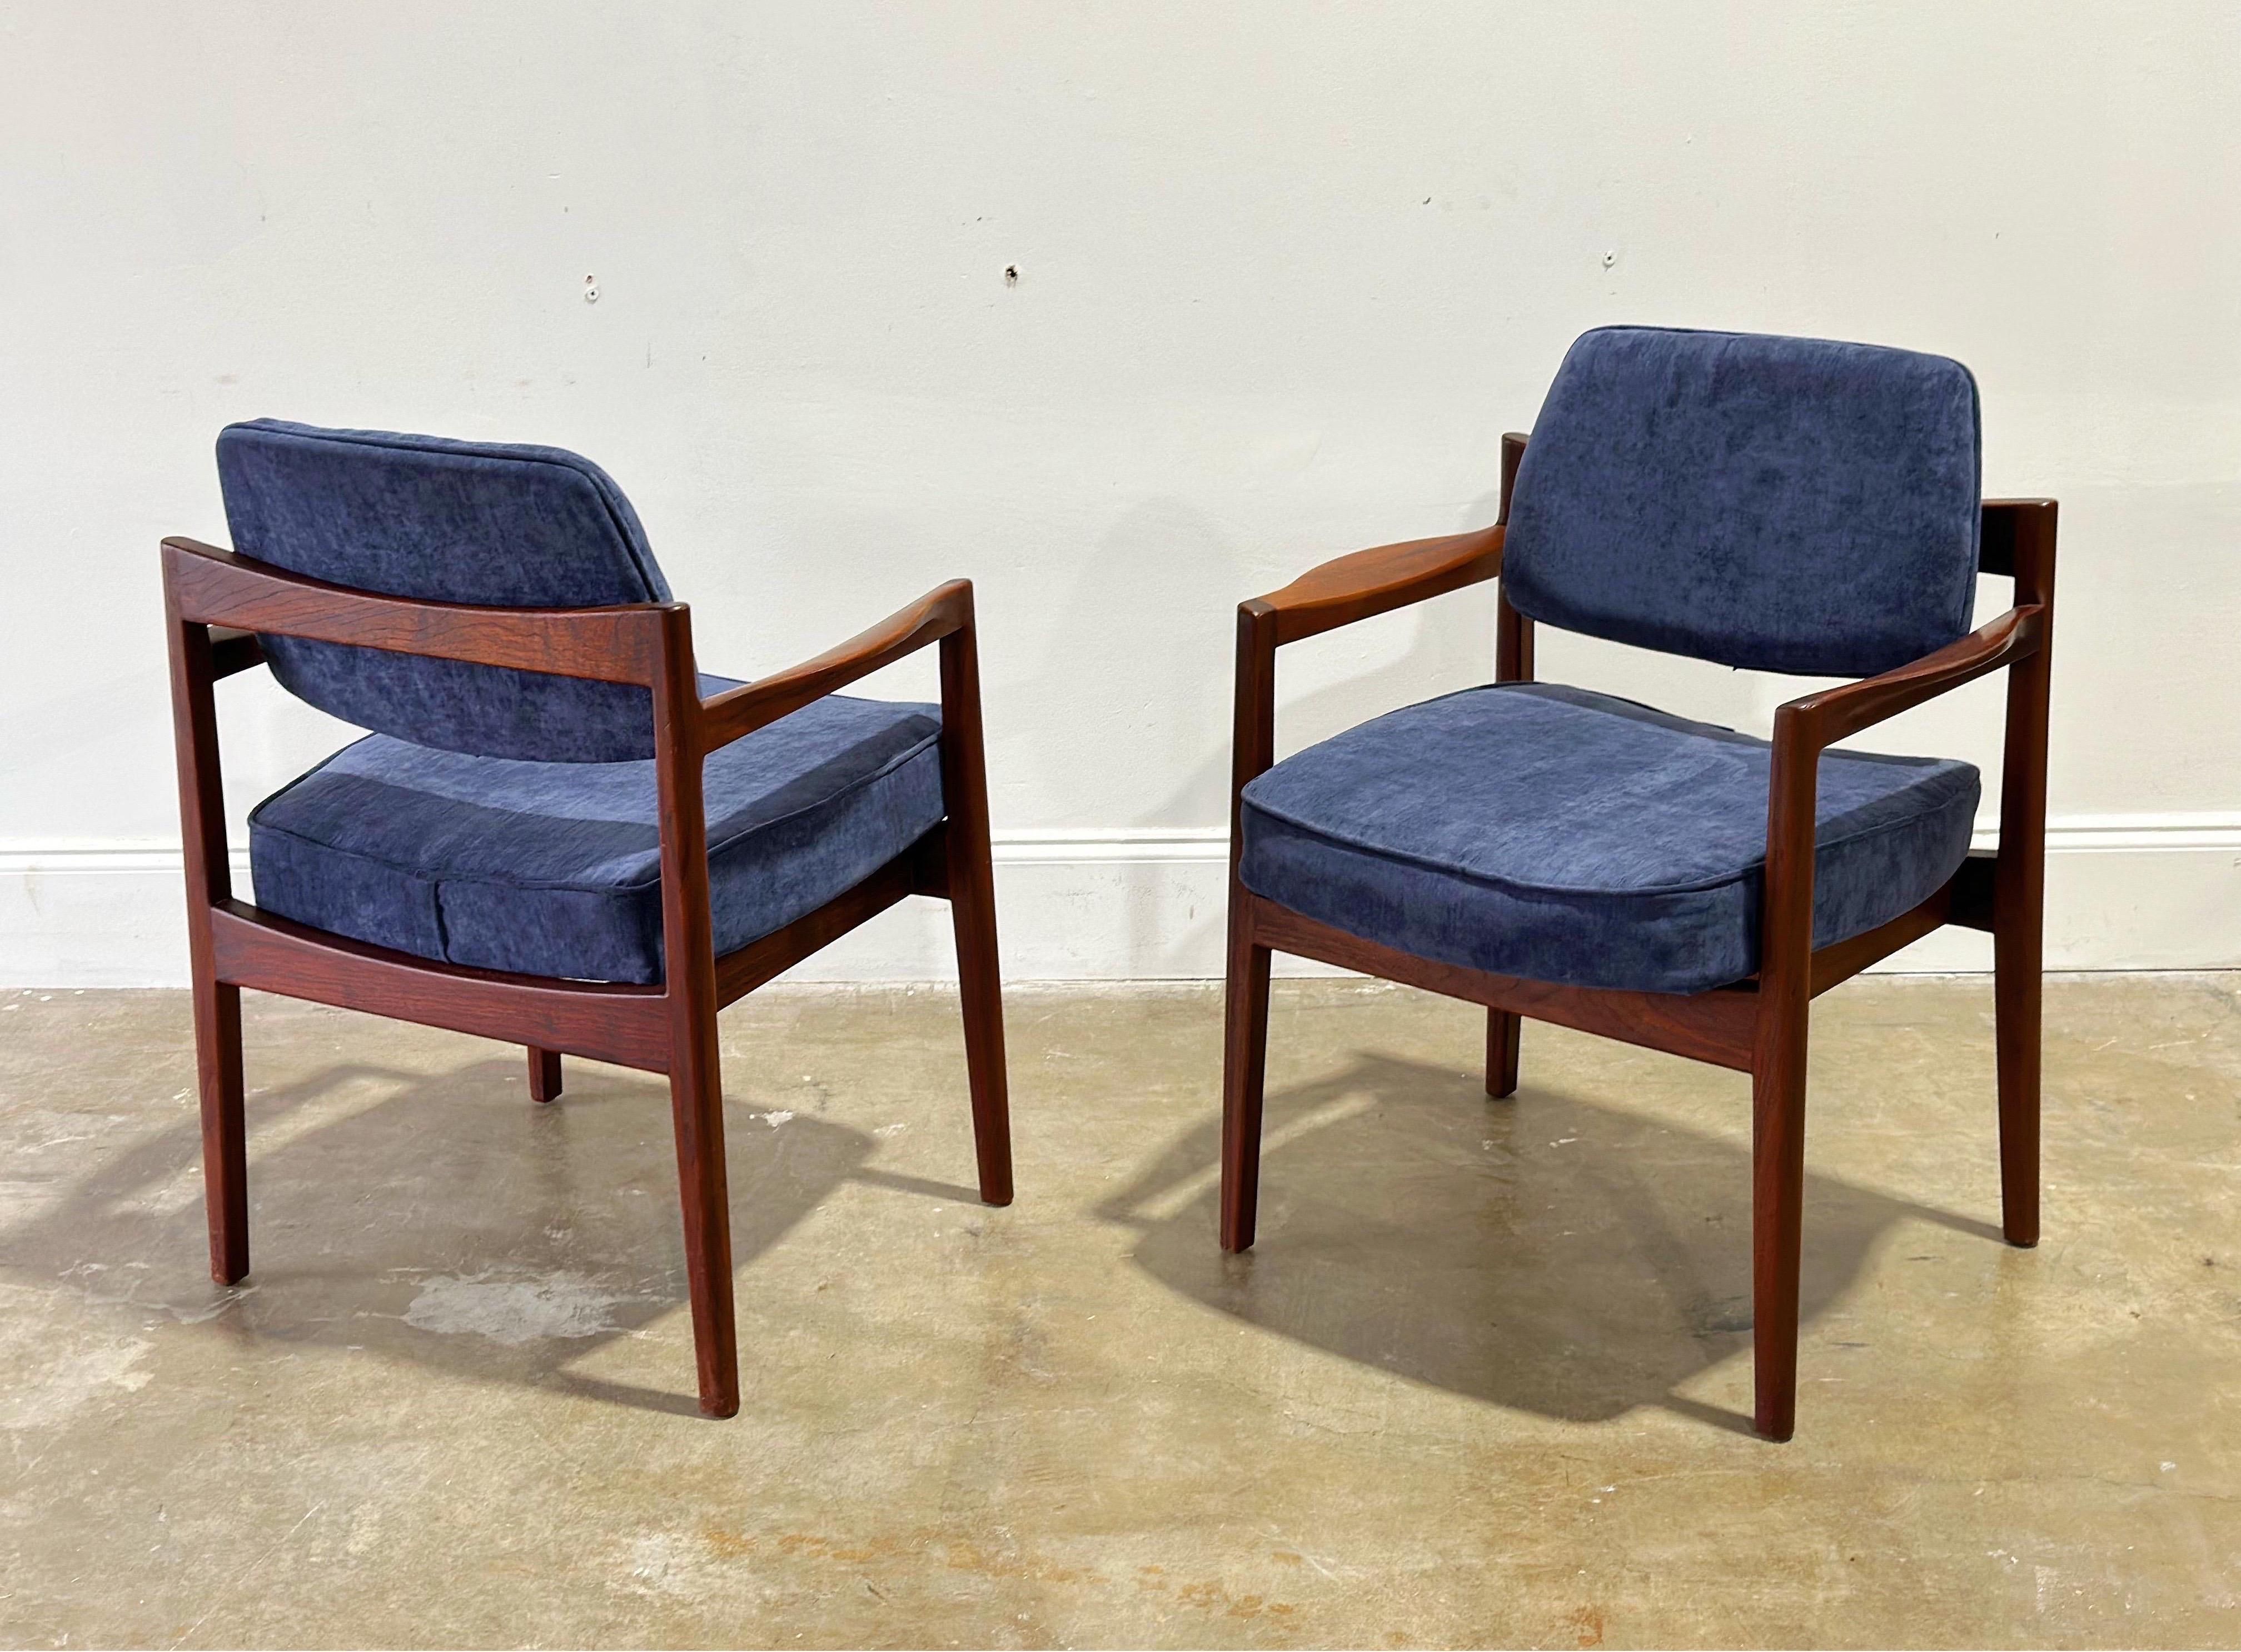 Jens Risom upholstered armchairs in sculpted solid black walnut - set of four, circa early 1960s. Refined, elegant Danish modern design coupled with stout and sturdy American craftsmanship.

This listing is for a set of four (4) arm